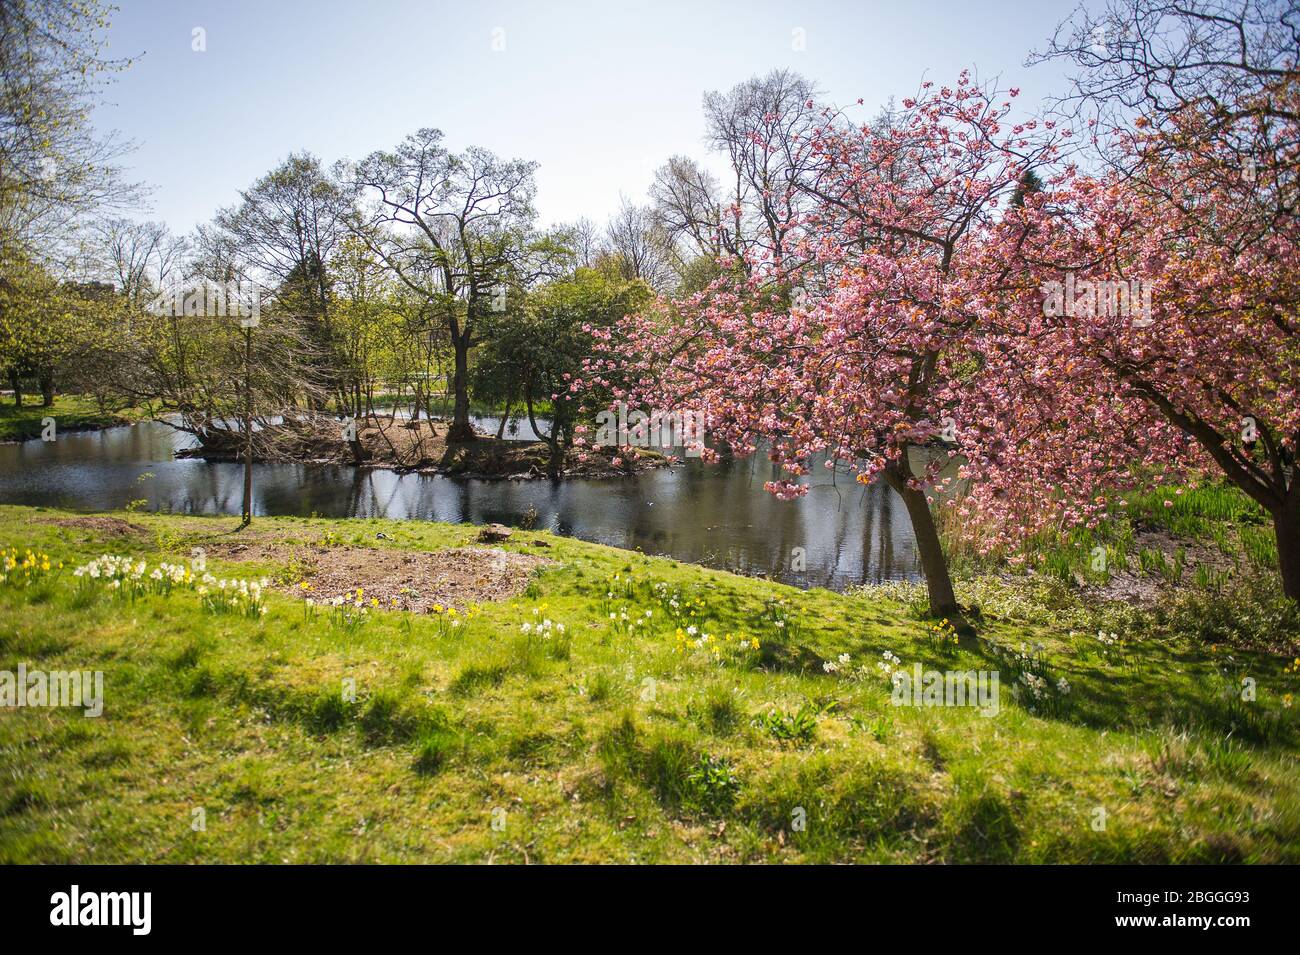 Glasgow, UK. 21st Apr, 2020. Pictured: Bright vivid pink cherry blossom fills the park with a splash of colour. Scenes from Kelvingrove Park in Glasgow during the coronavirus (COVID-19) lockdown. Credit: Colin Fisher/Alamy Live News Stock Photo